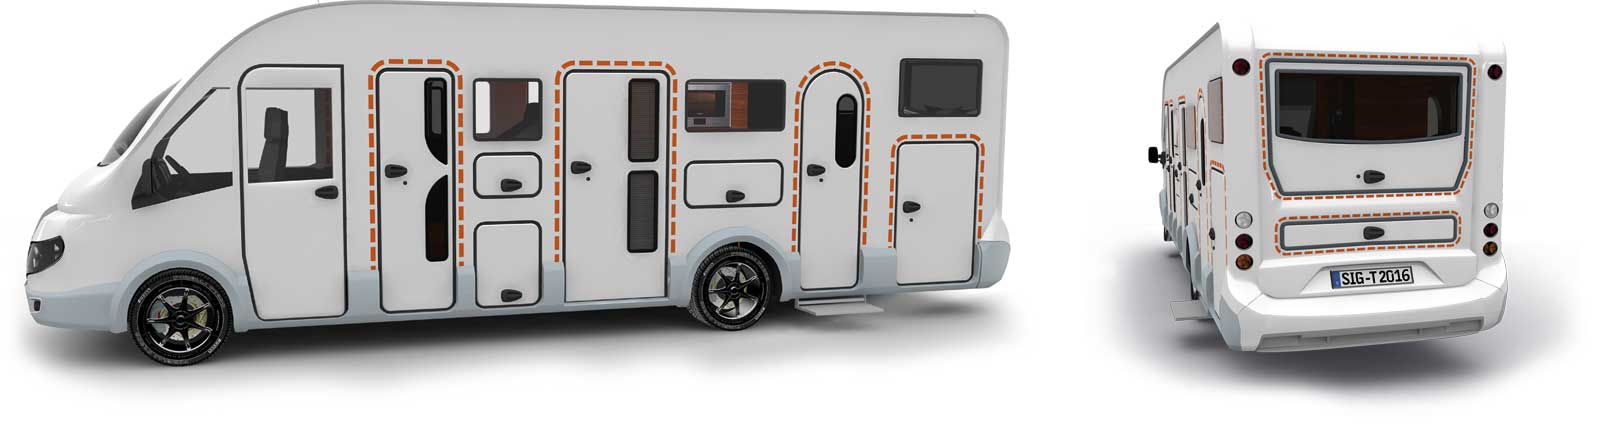 Satisfied tegos customers with Challenger caravans and RVs